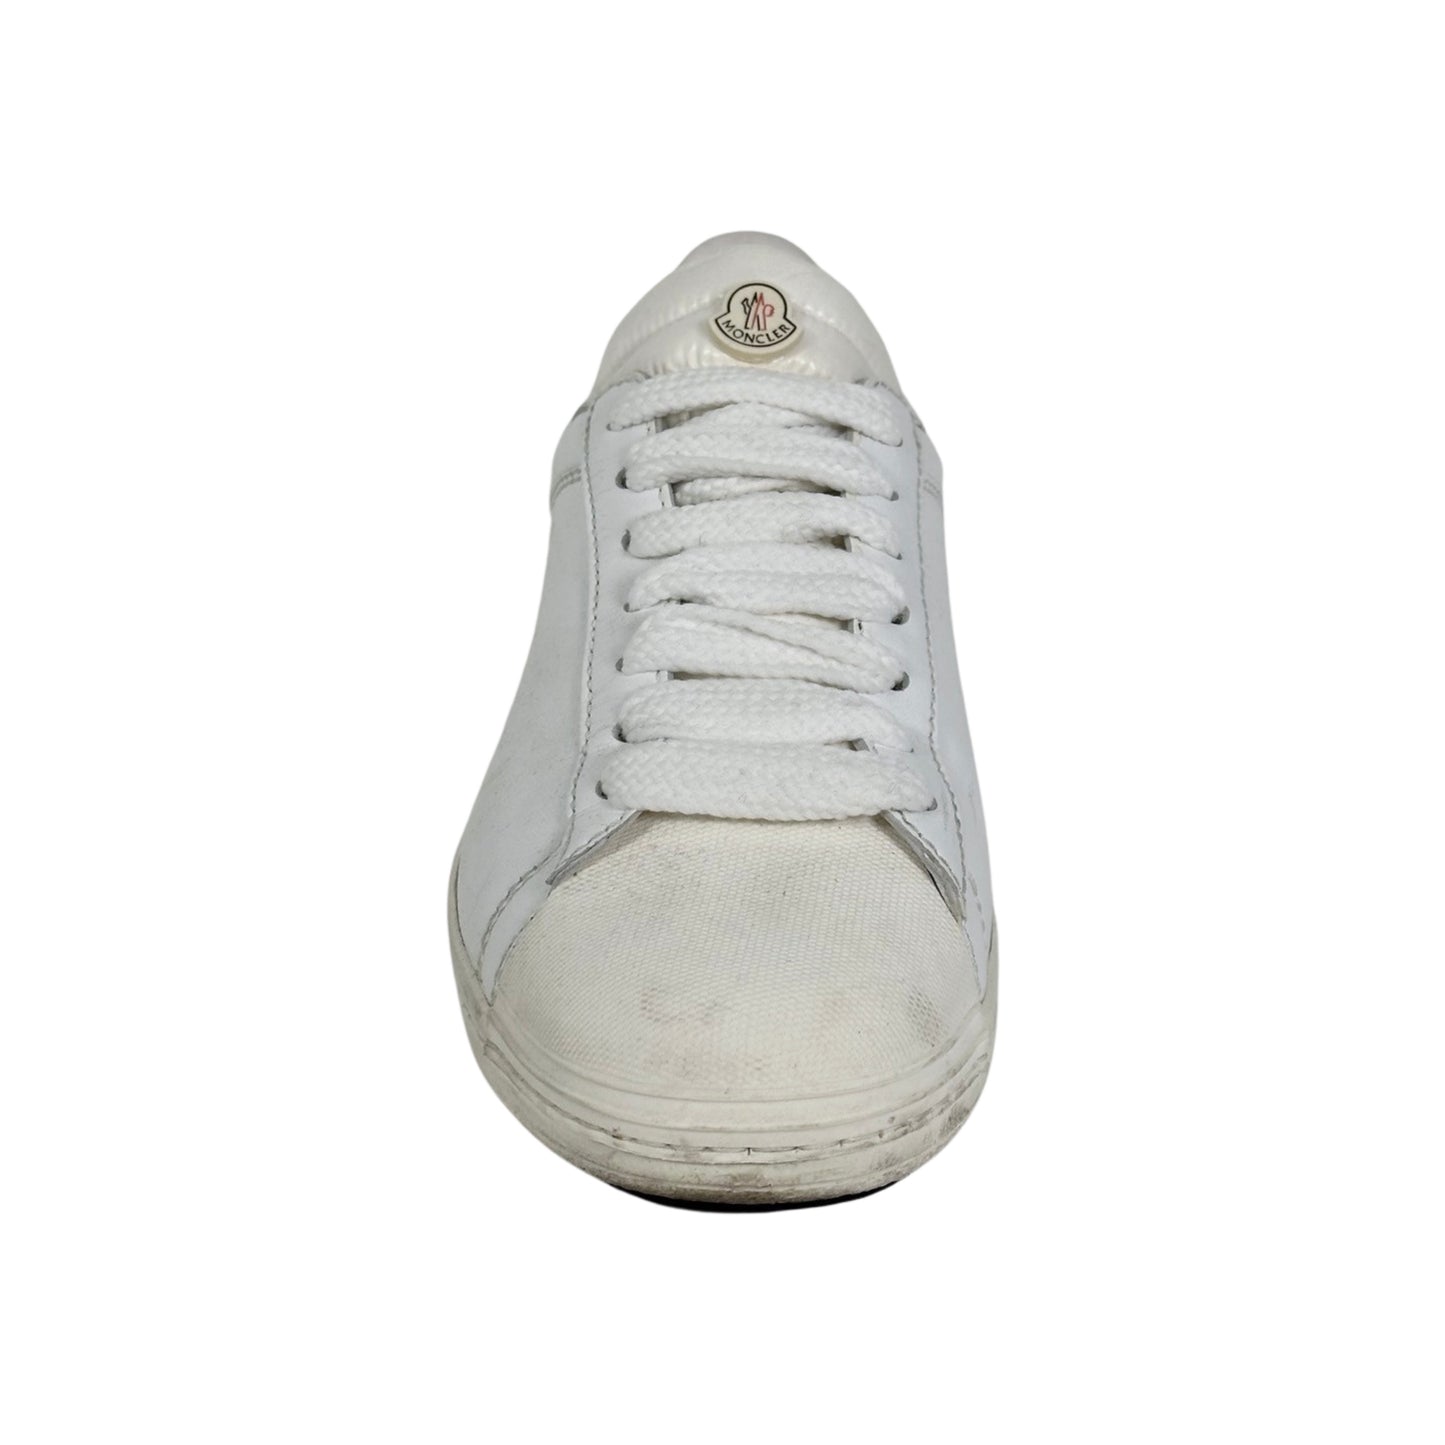 Moncler Angeline Leather Sneakers - Size 37 EUR